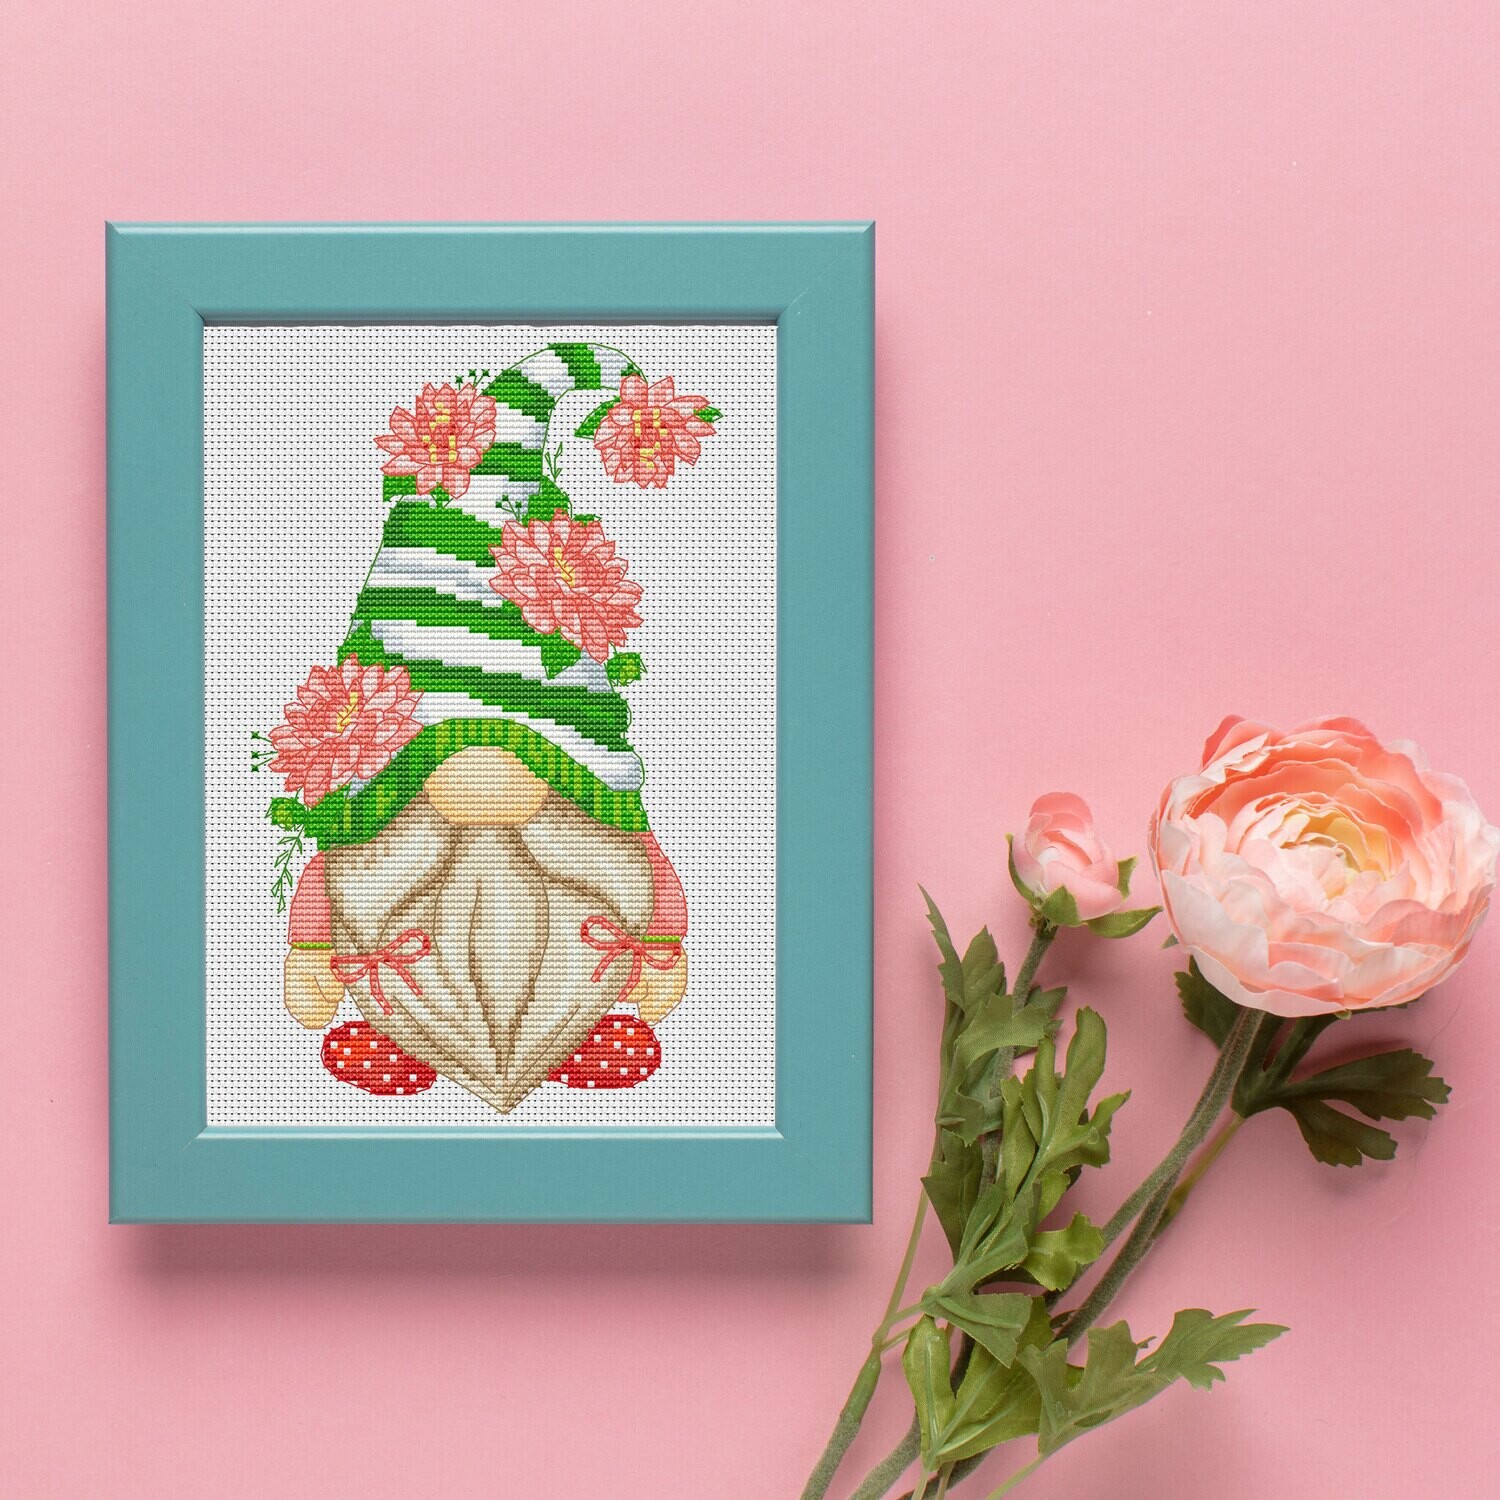 Gnome with peonies, Cross stitch pattern, Gnome cross stitch, Counted cross stitch, Floral cross stitch